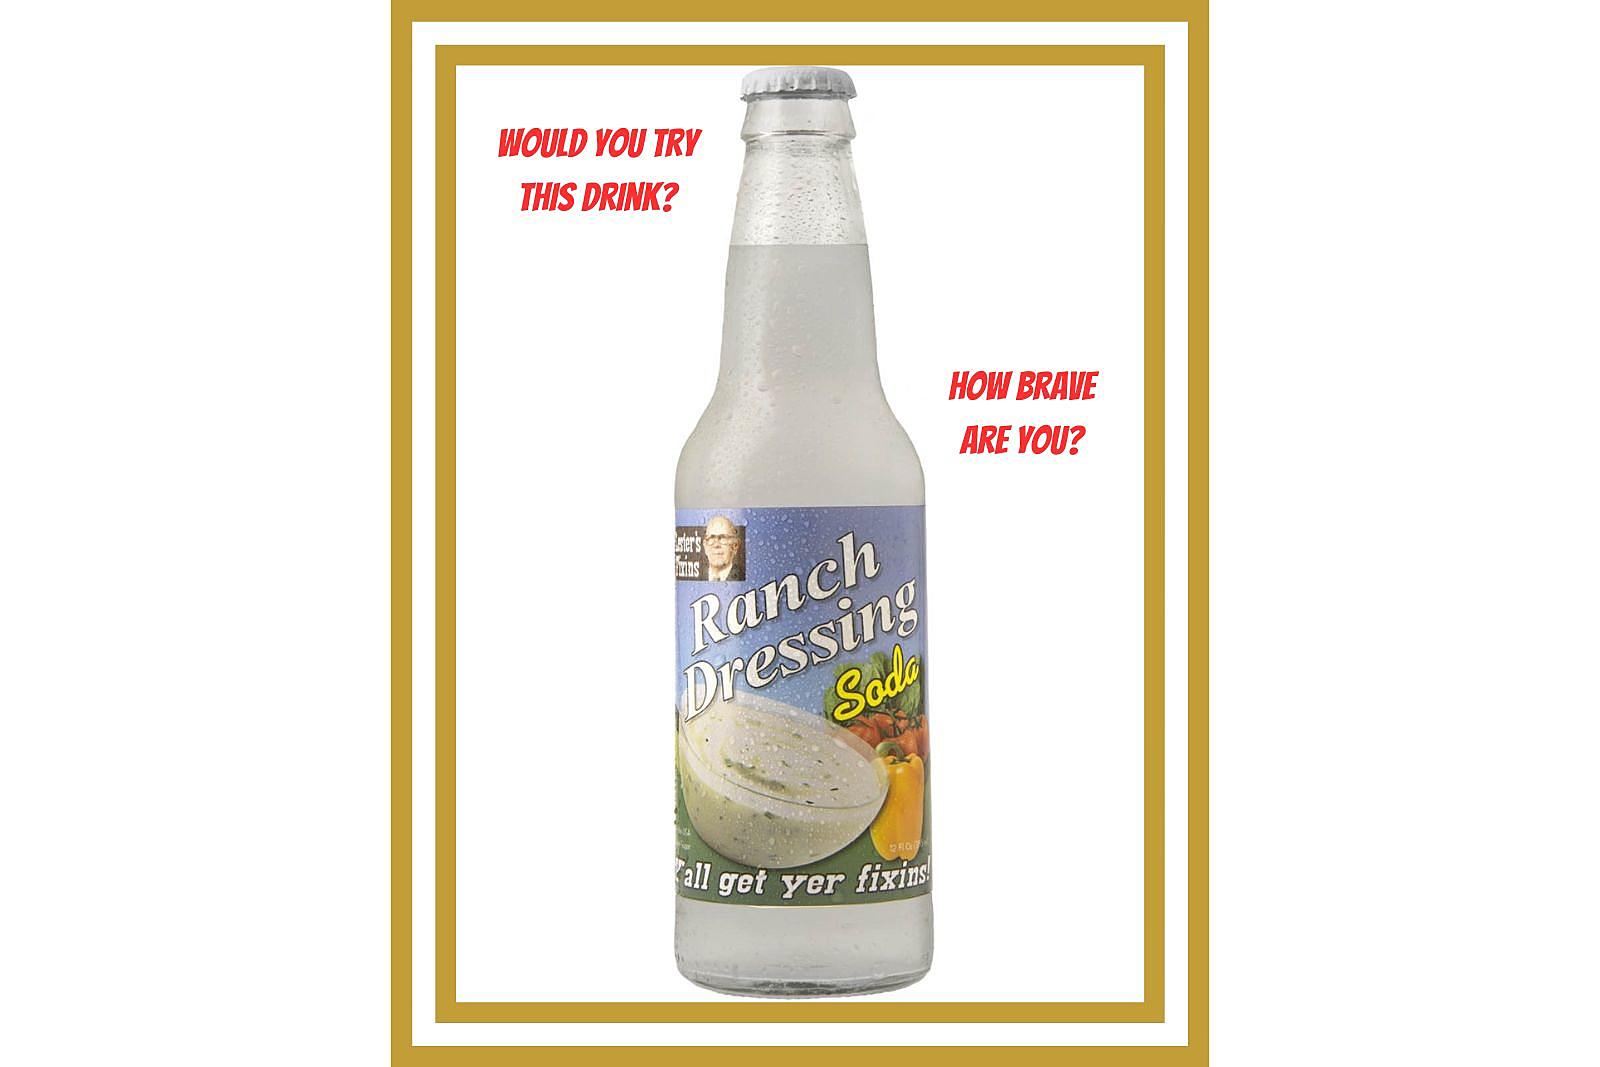 https://townsquare.media/site/1107/files/2023/03/attachment-Would-You-Try-This-Drink.jpg?w=1600&q=75